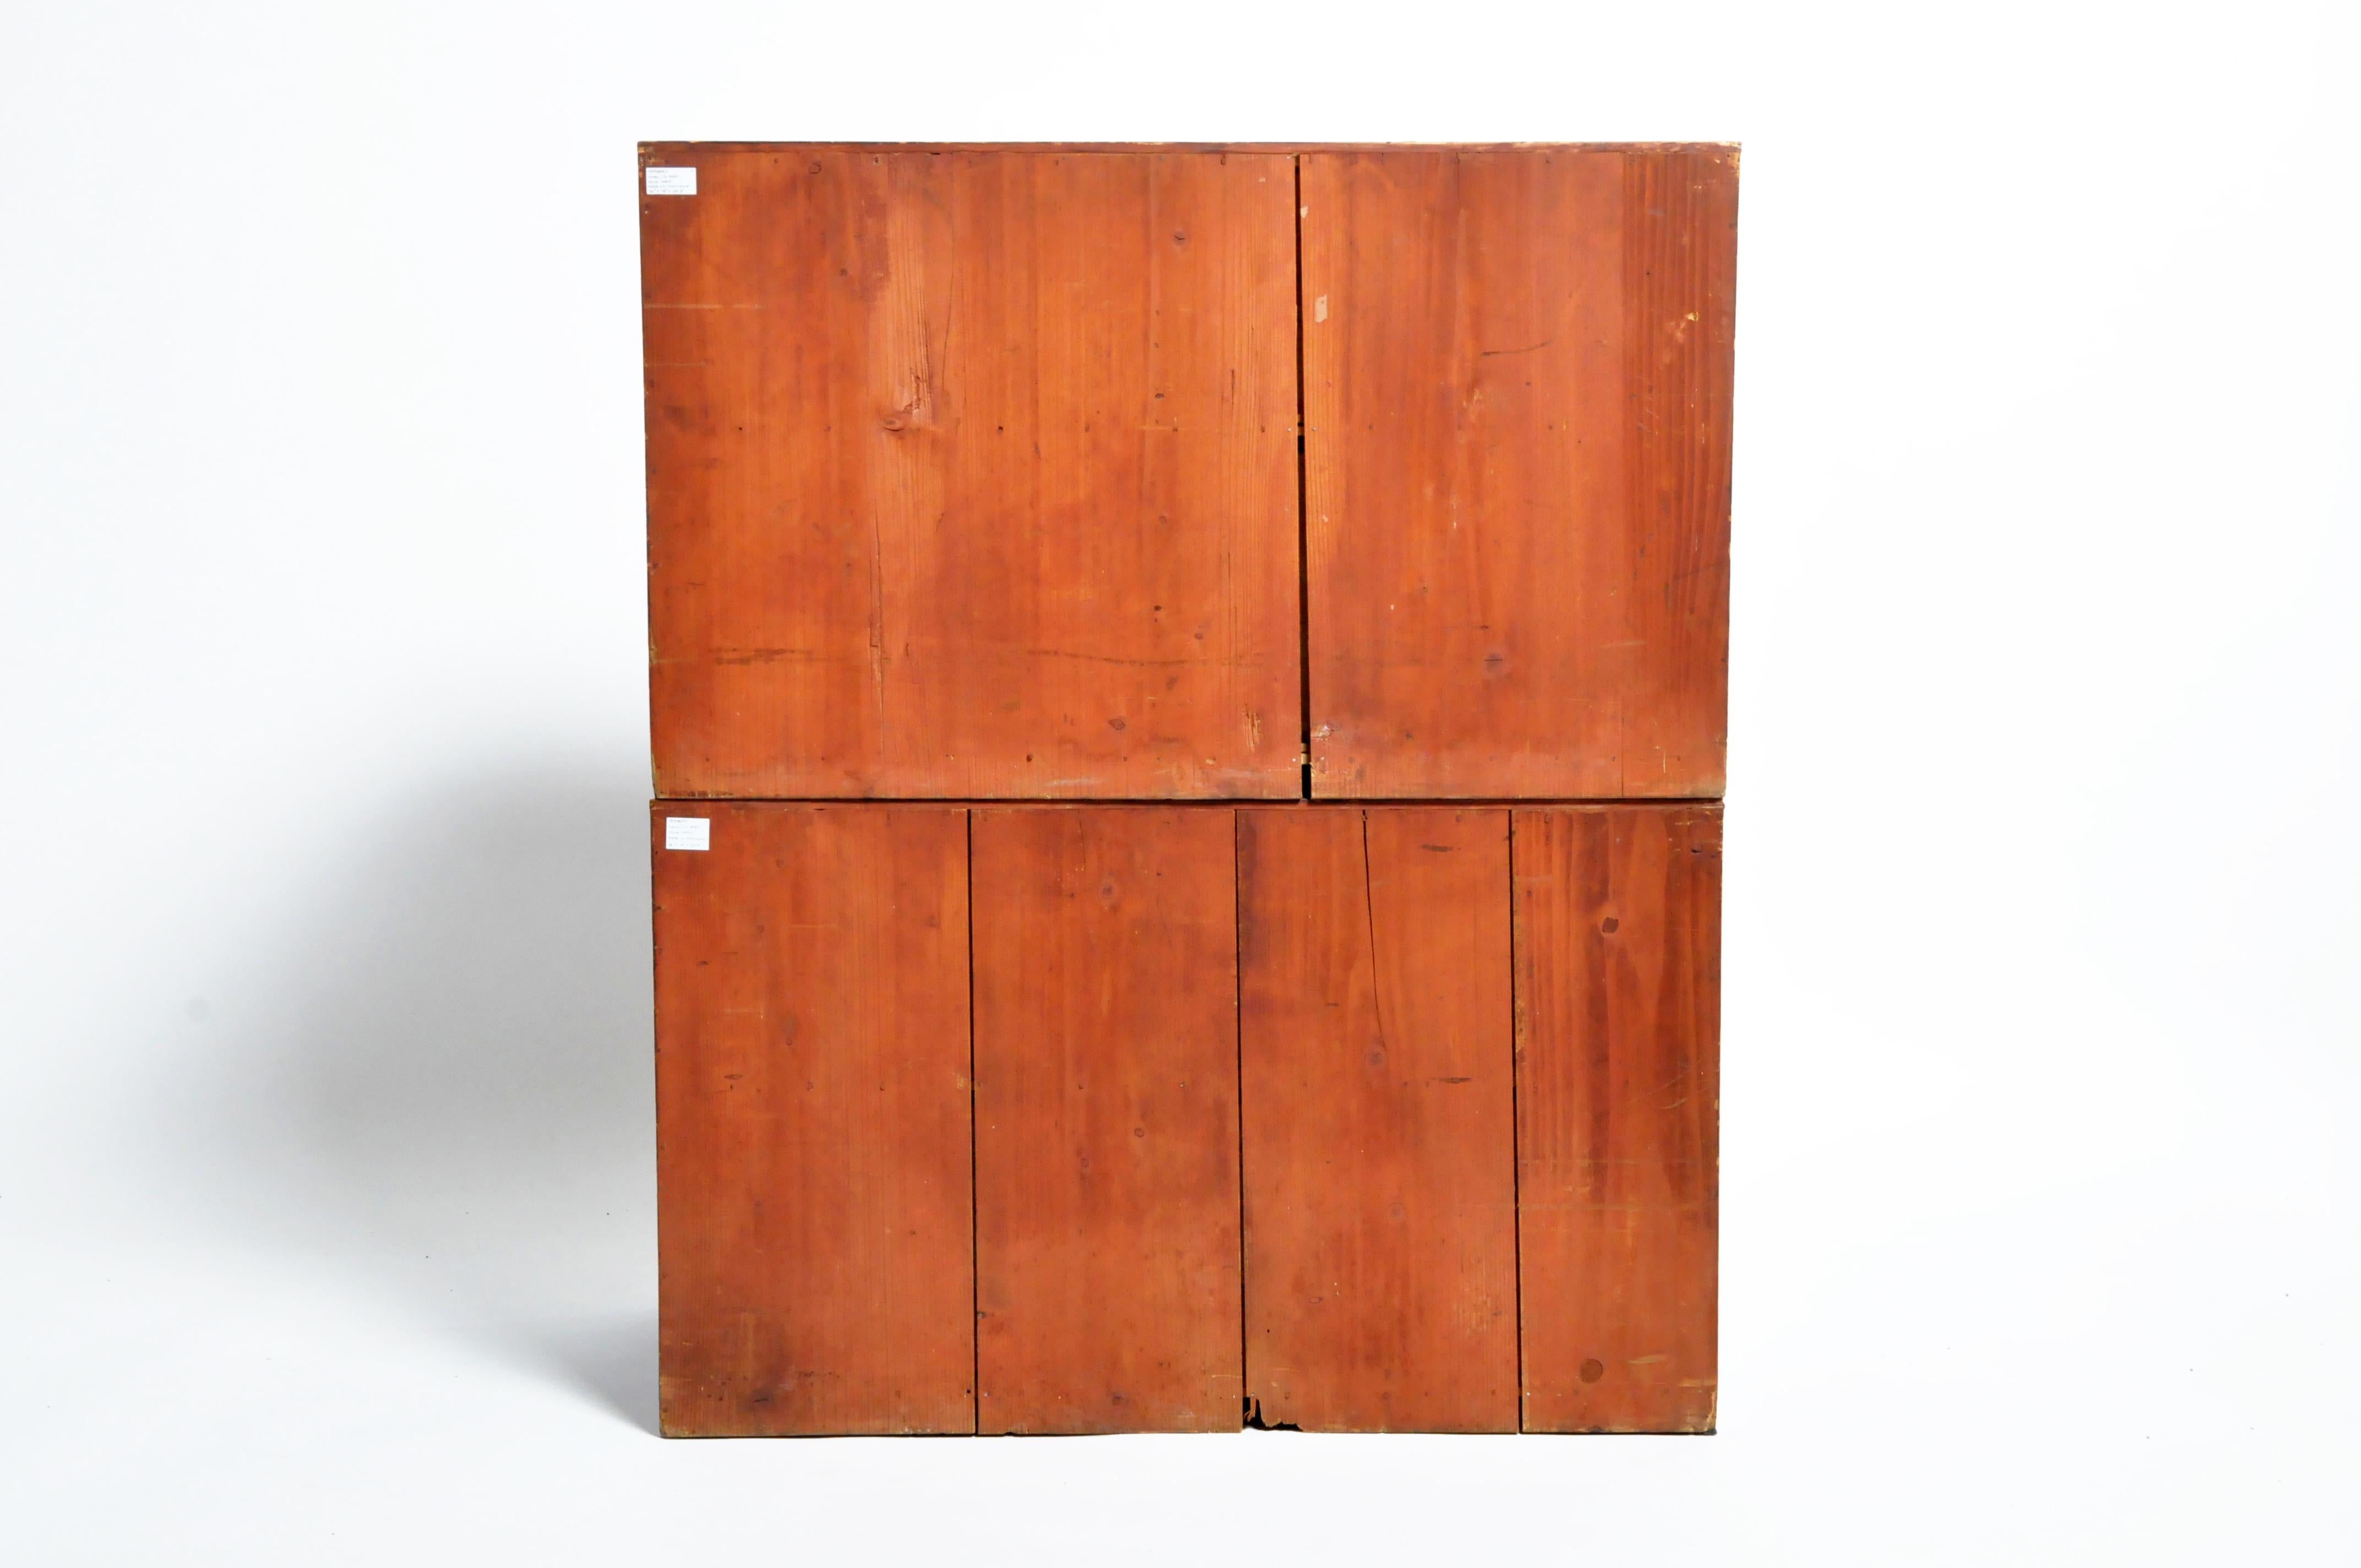 This two-part Tansu chest is from Japan and was made from pine wood, circa 1900. The piece features 6 drawers total and can either be stacked on top on one another or separated and used as a nightstand or side table. Wear consistent with age and use.